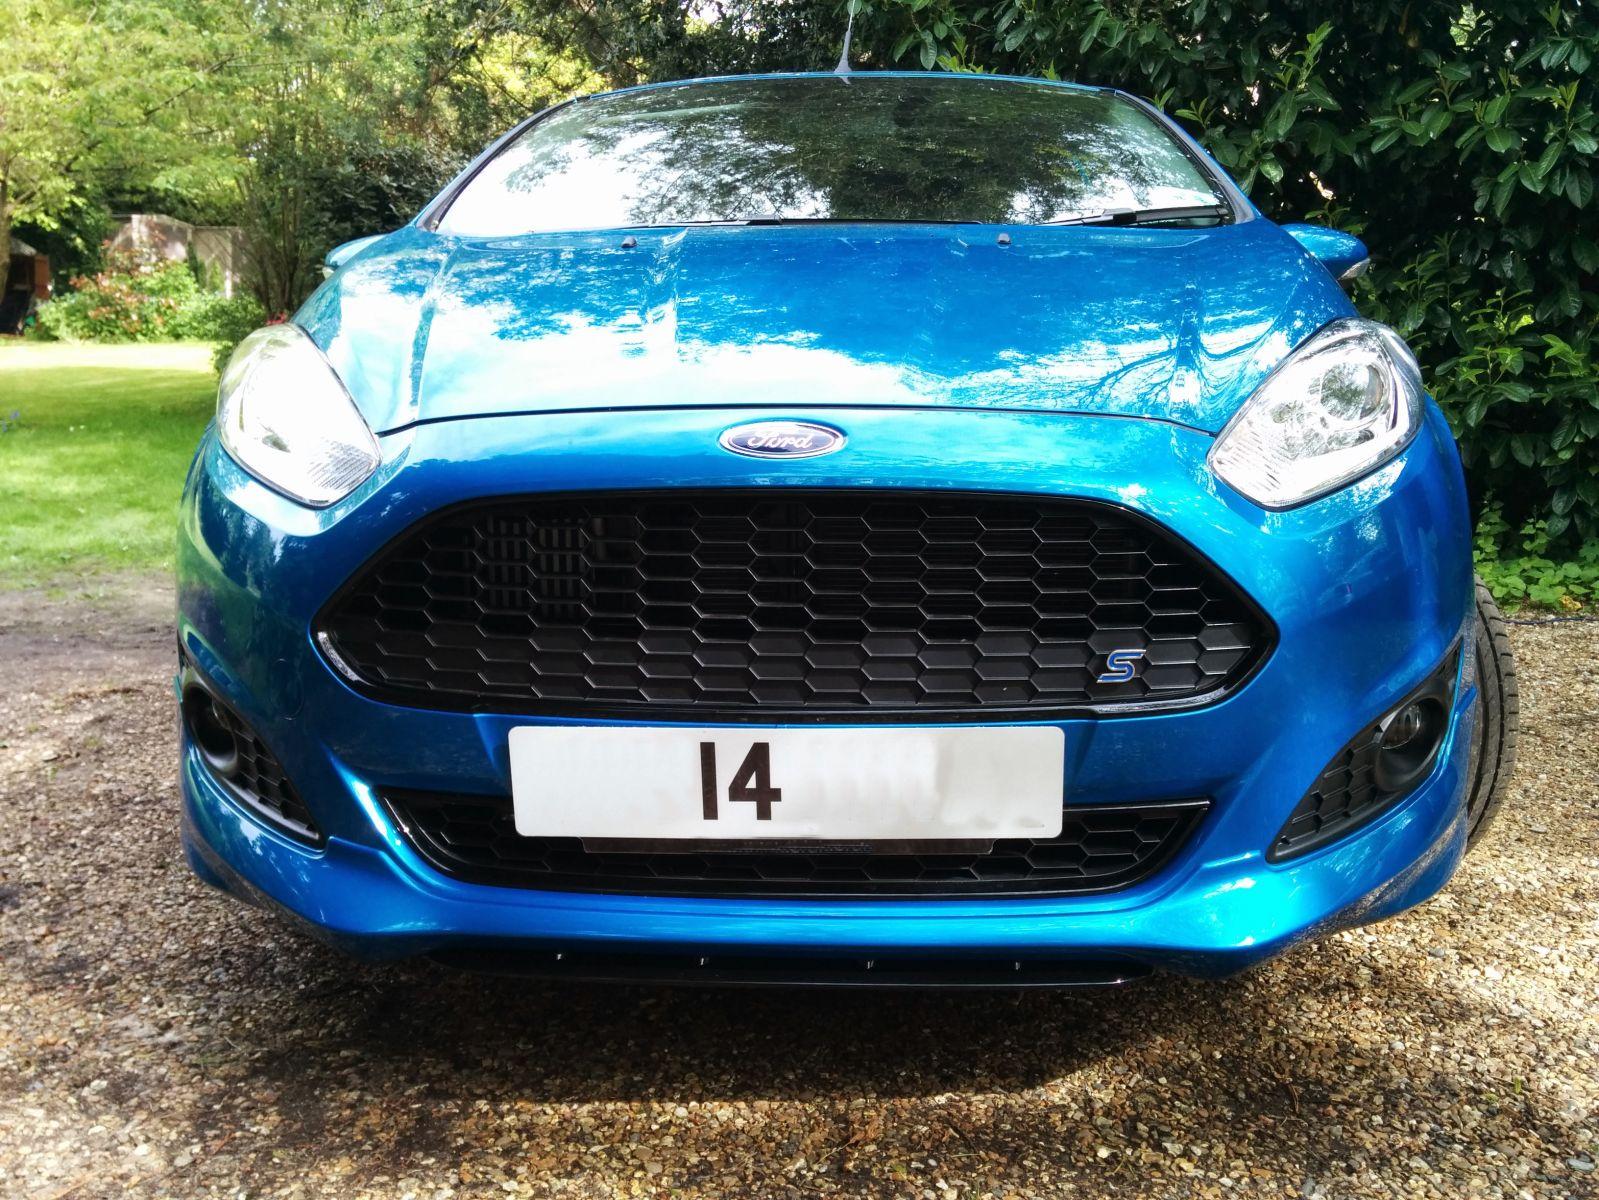 2014 Candy Blue Fiesta Zetec S Front With S Badge